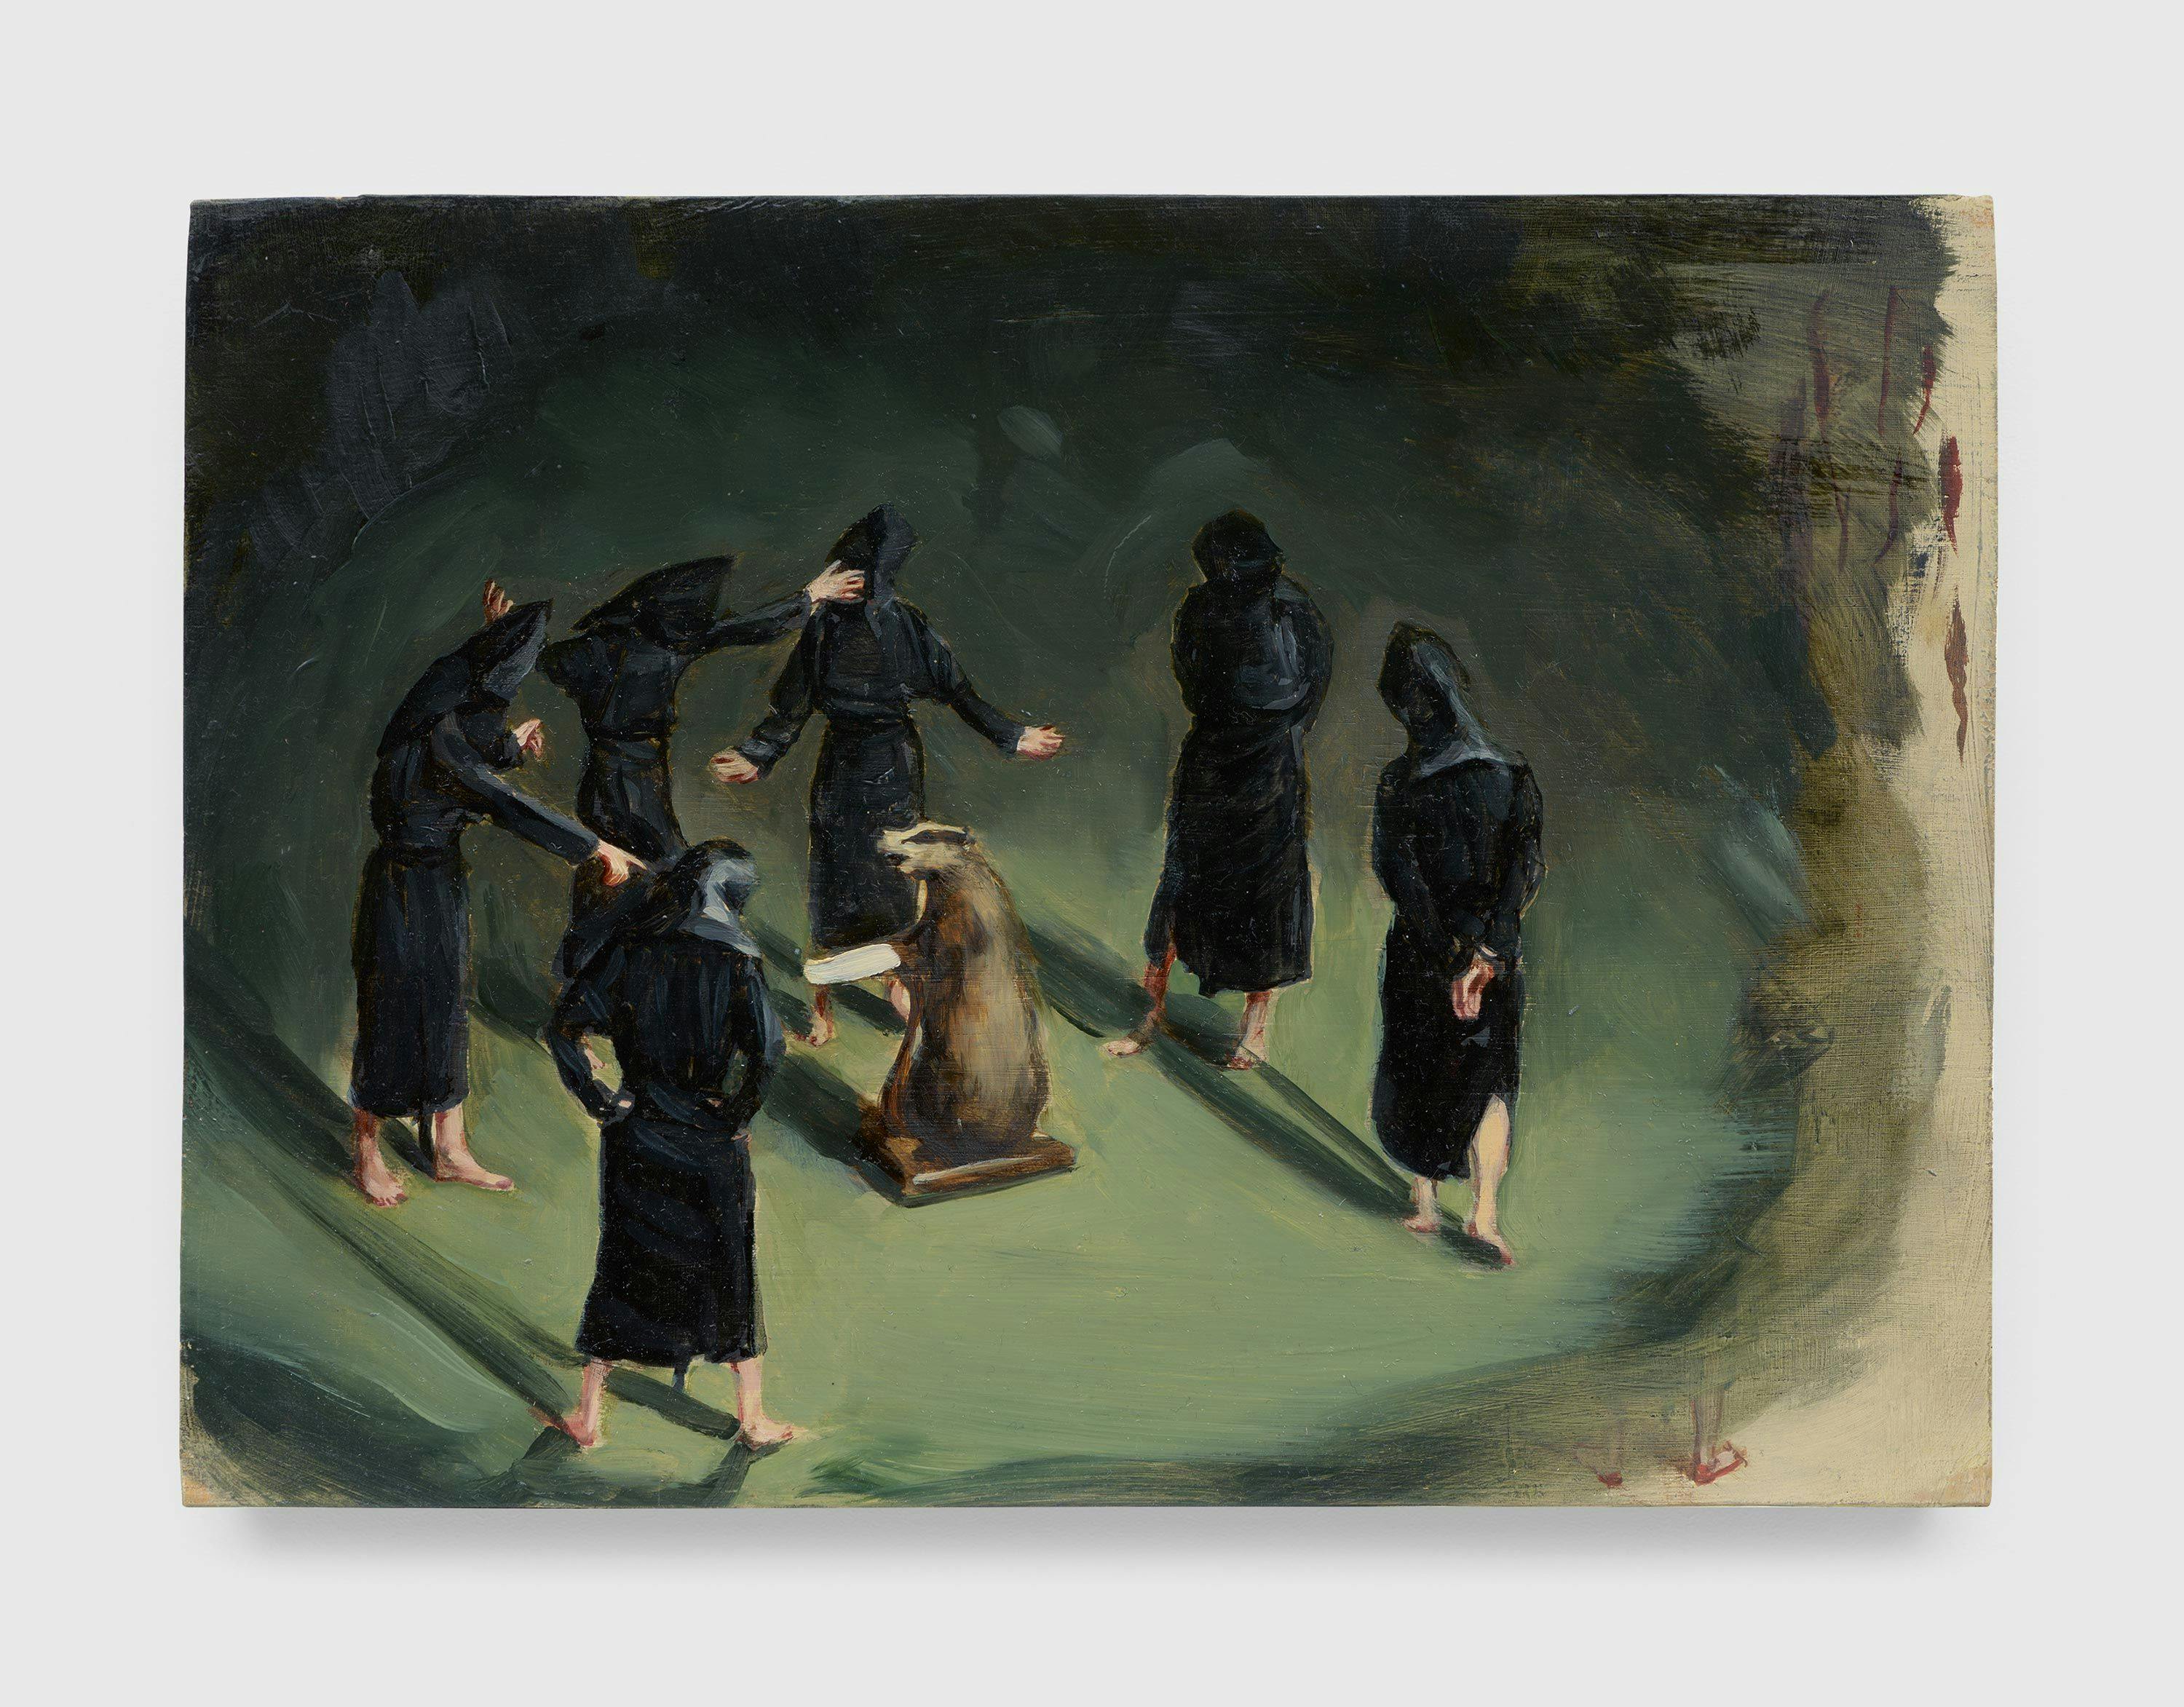 A painting by Michaël Borremans, titled Black Mould / The Badger's Song, dated 2015.